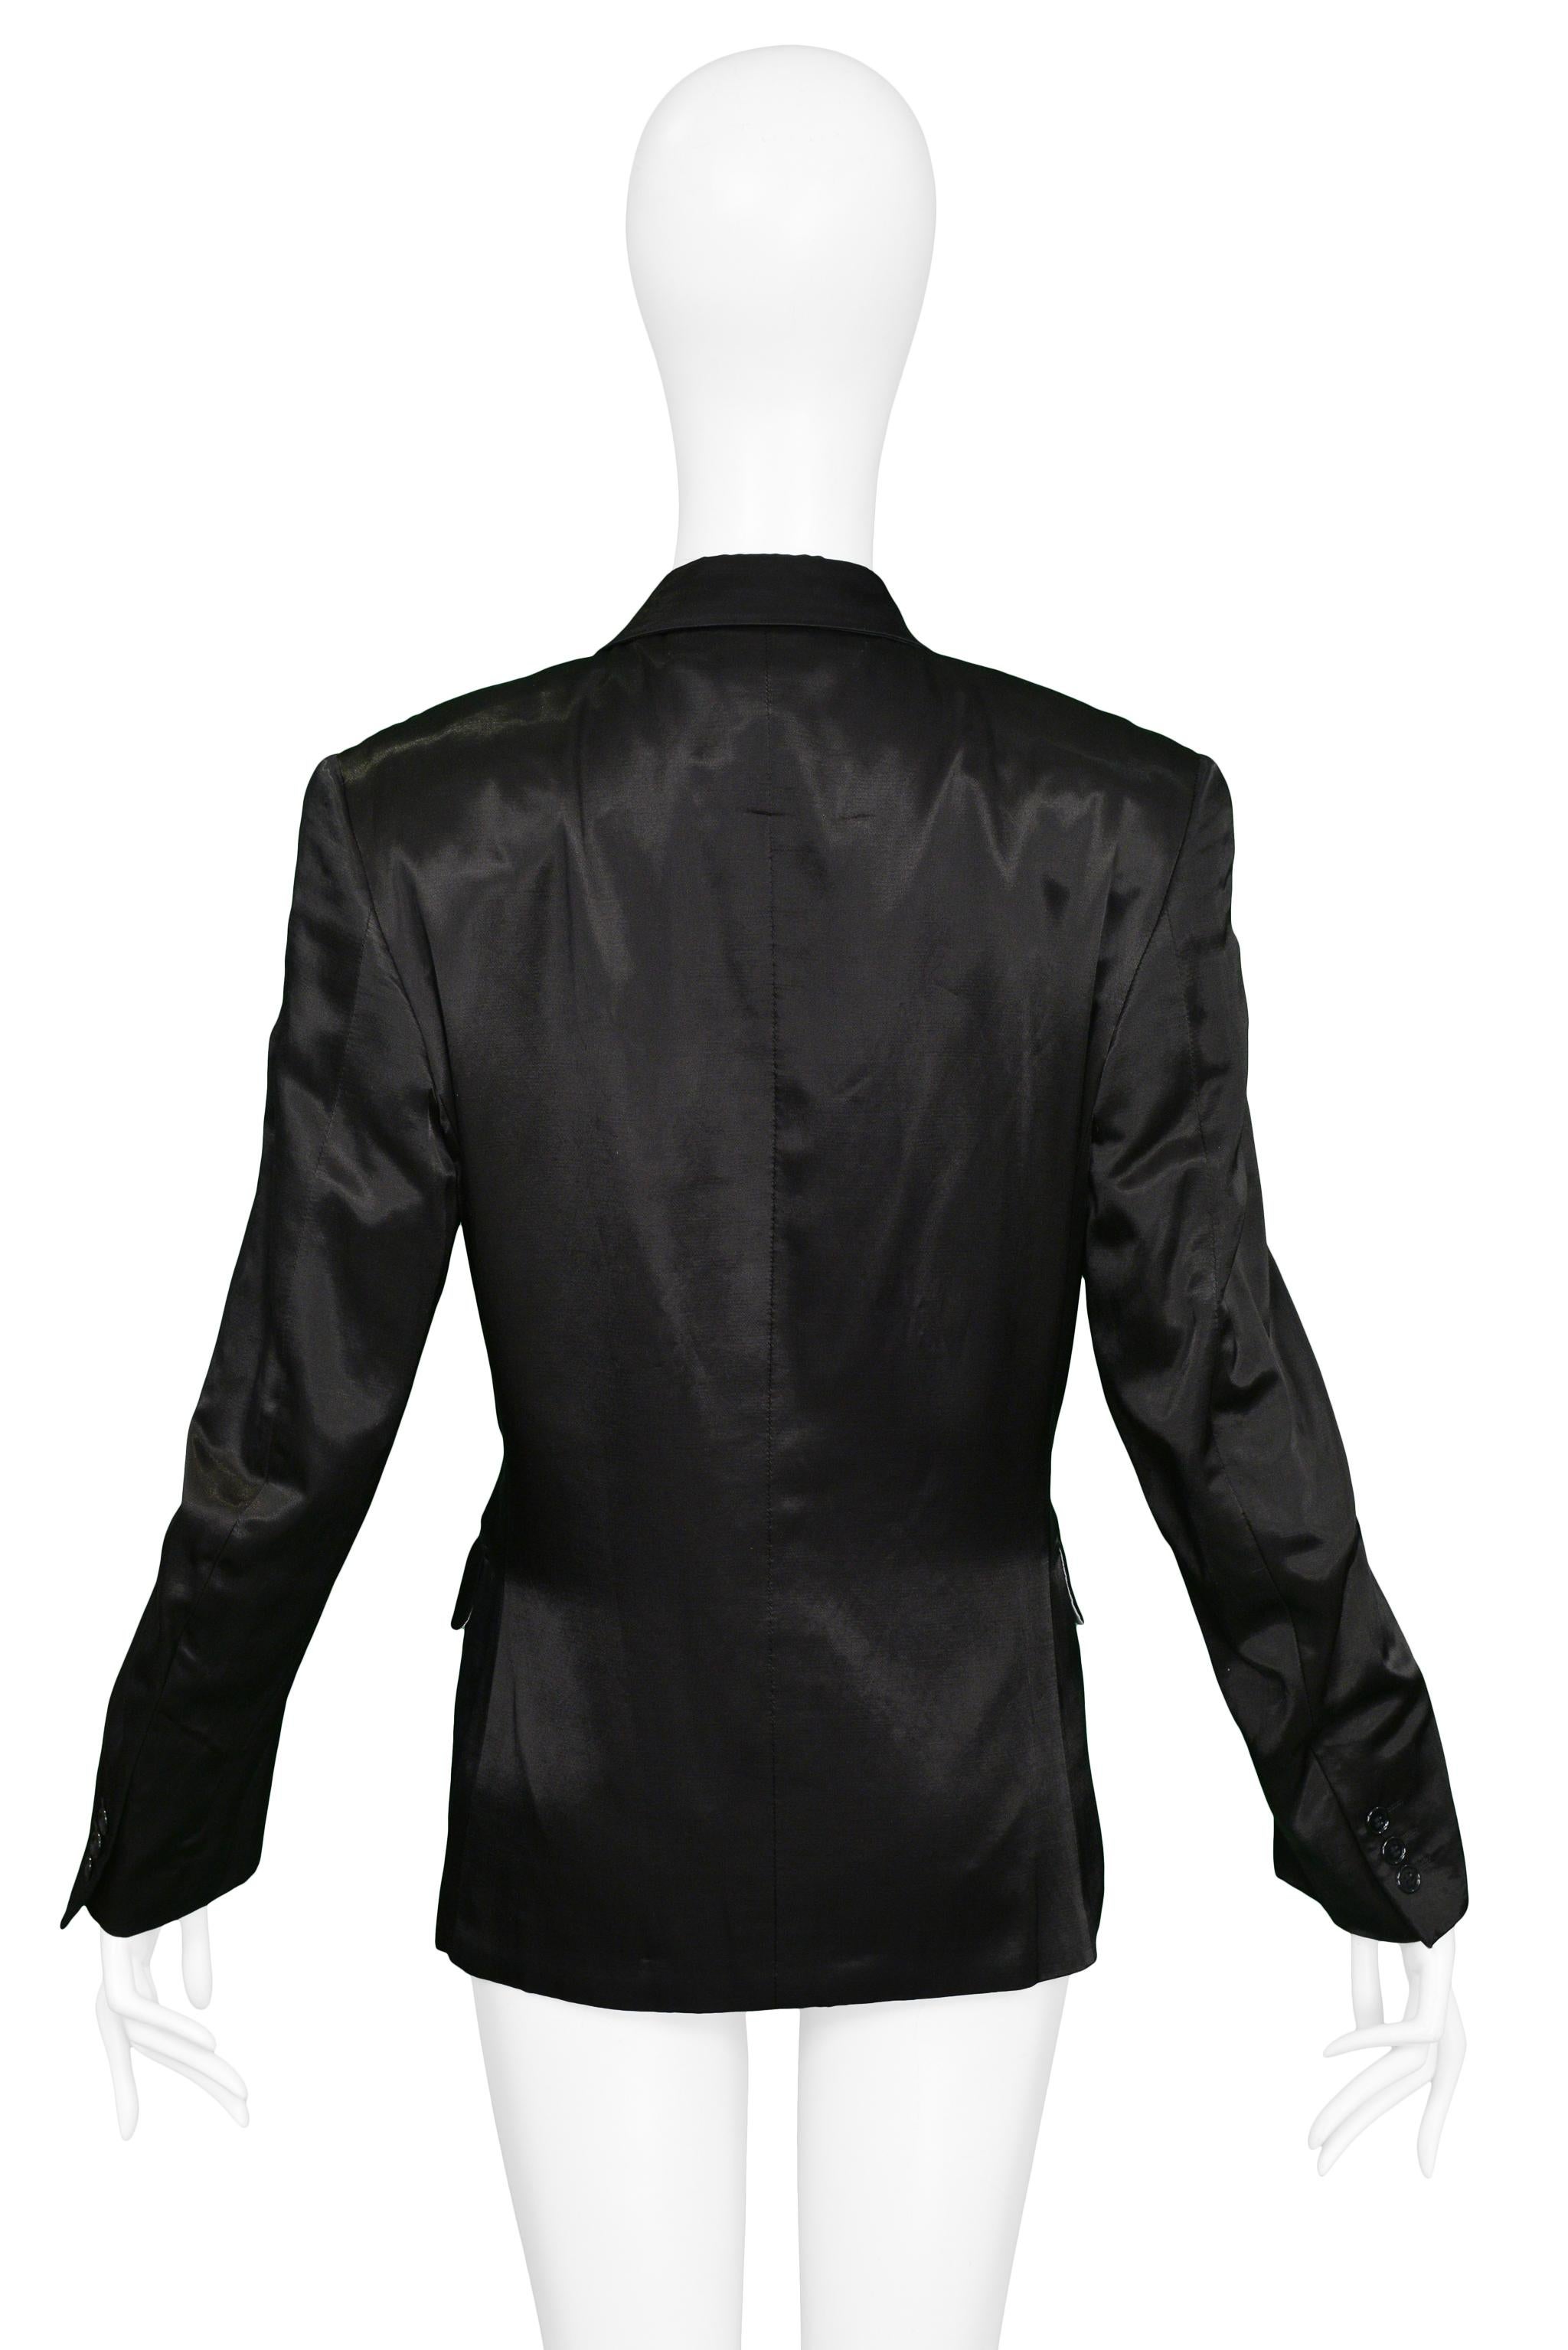 Comme Des Garcons Classic Black Satin Blazer In Excellent Condition For Sale In Los Angeles, CA